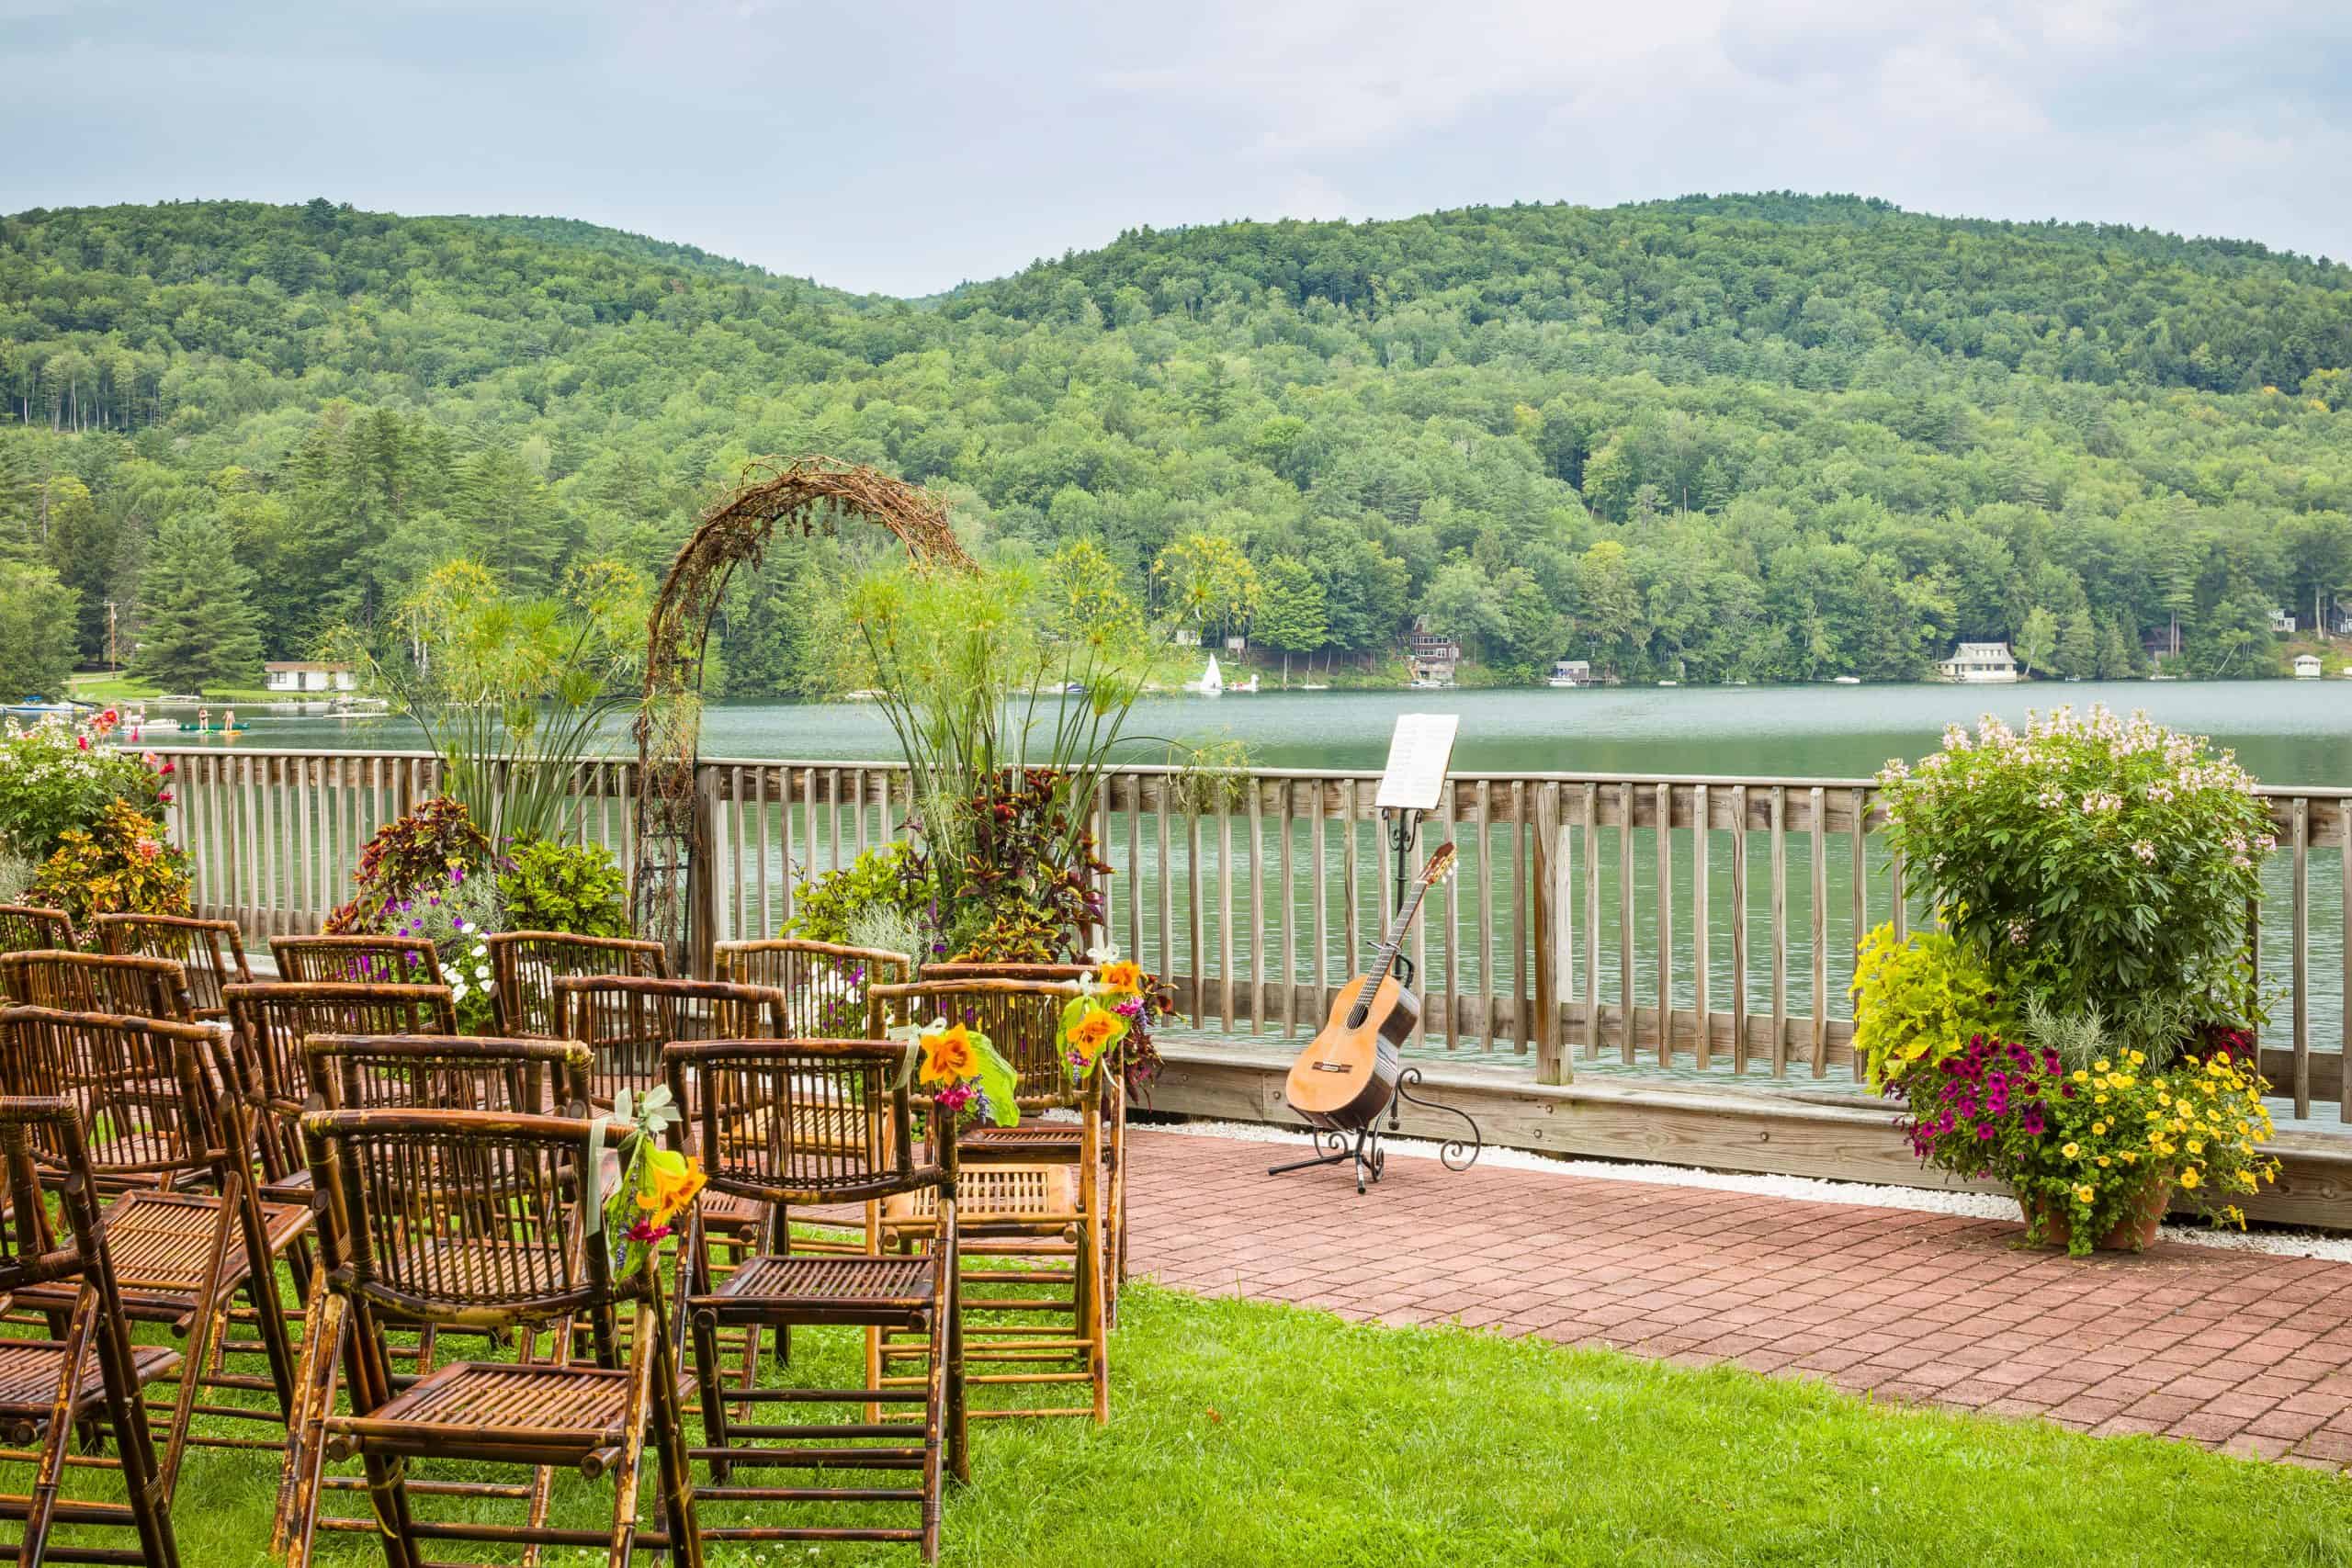 Lake Morey Resort - Summer Wedding with Arch Chairs Guitar and Lakeview